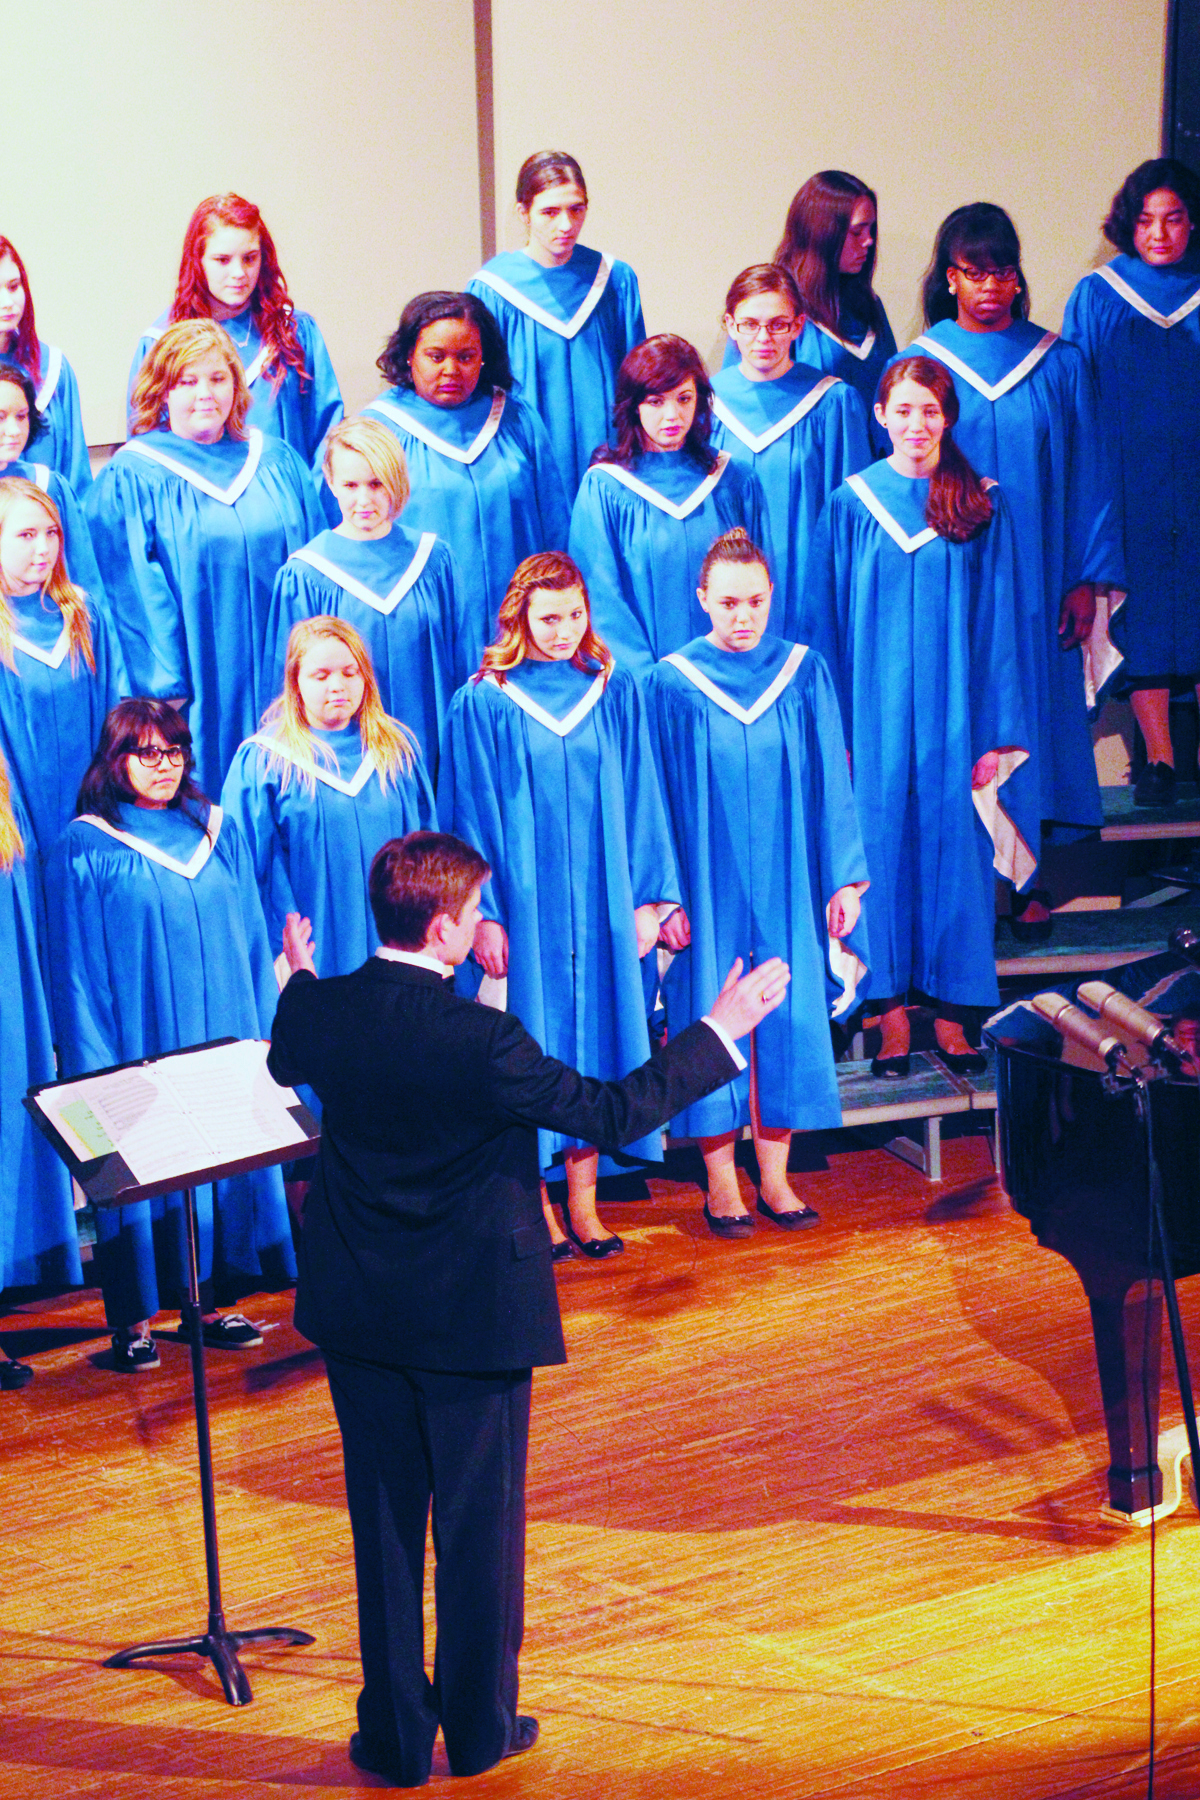 Dressed for the part: CCHS choir begins fundraisers